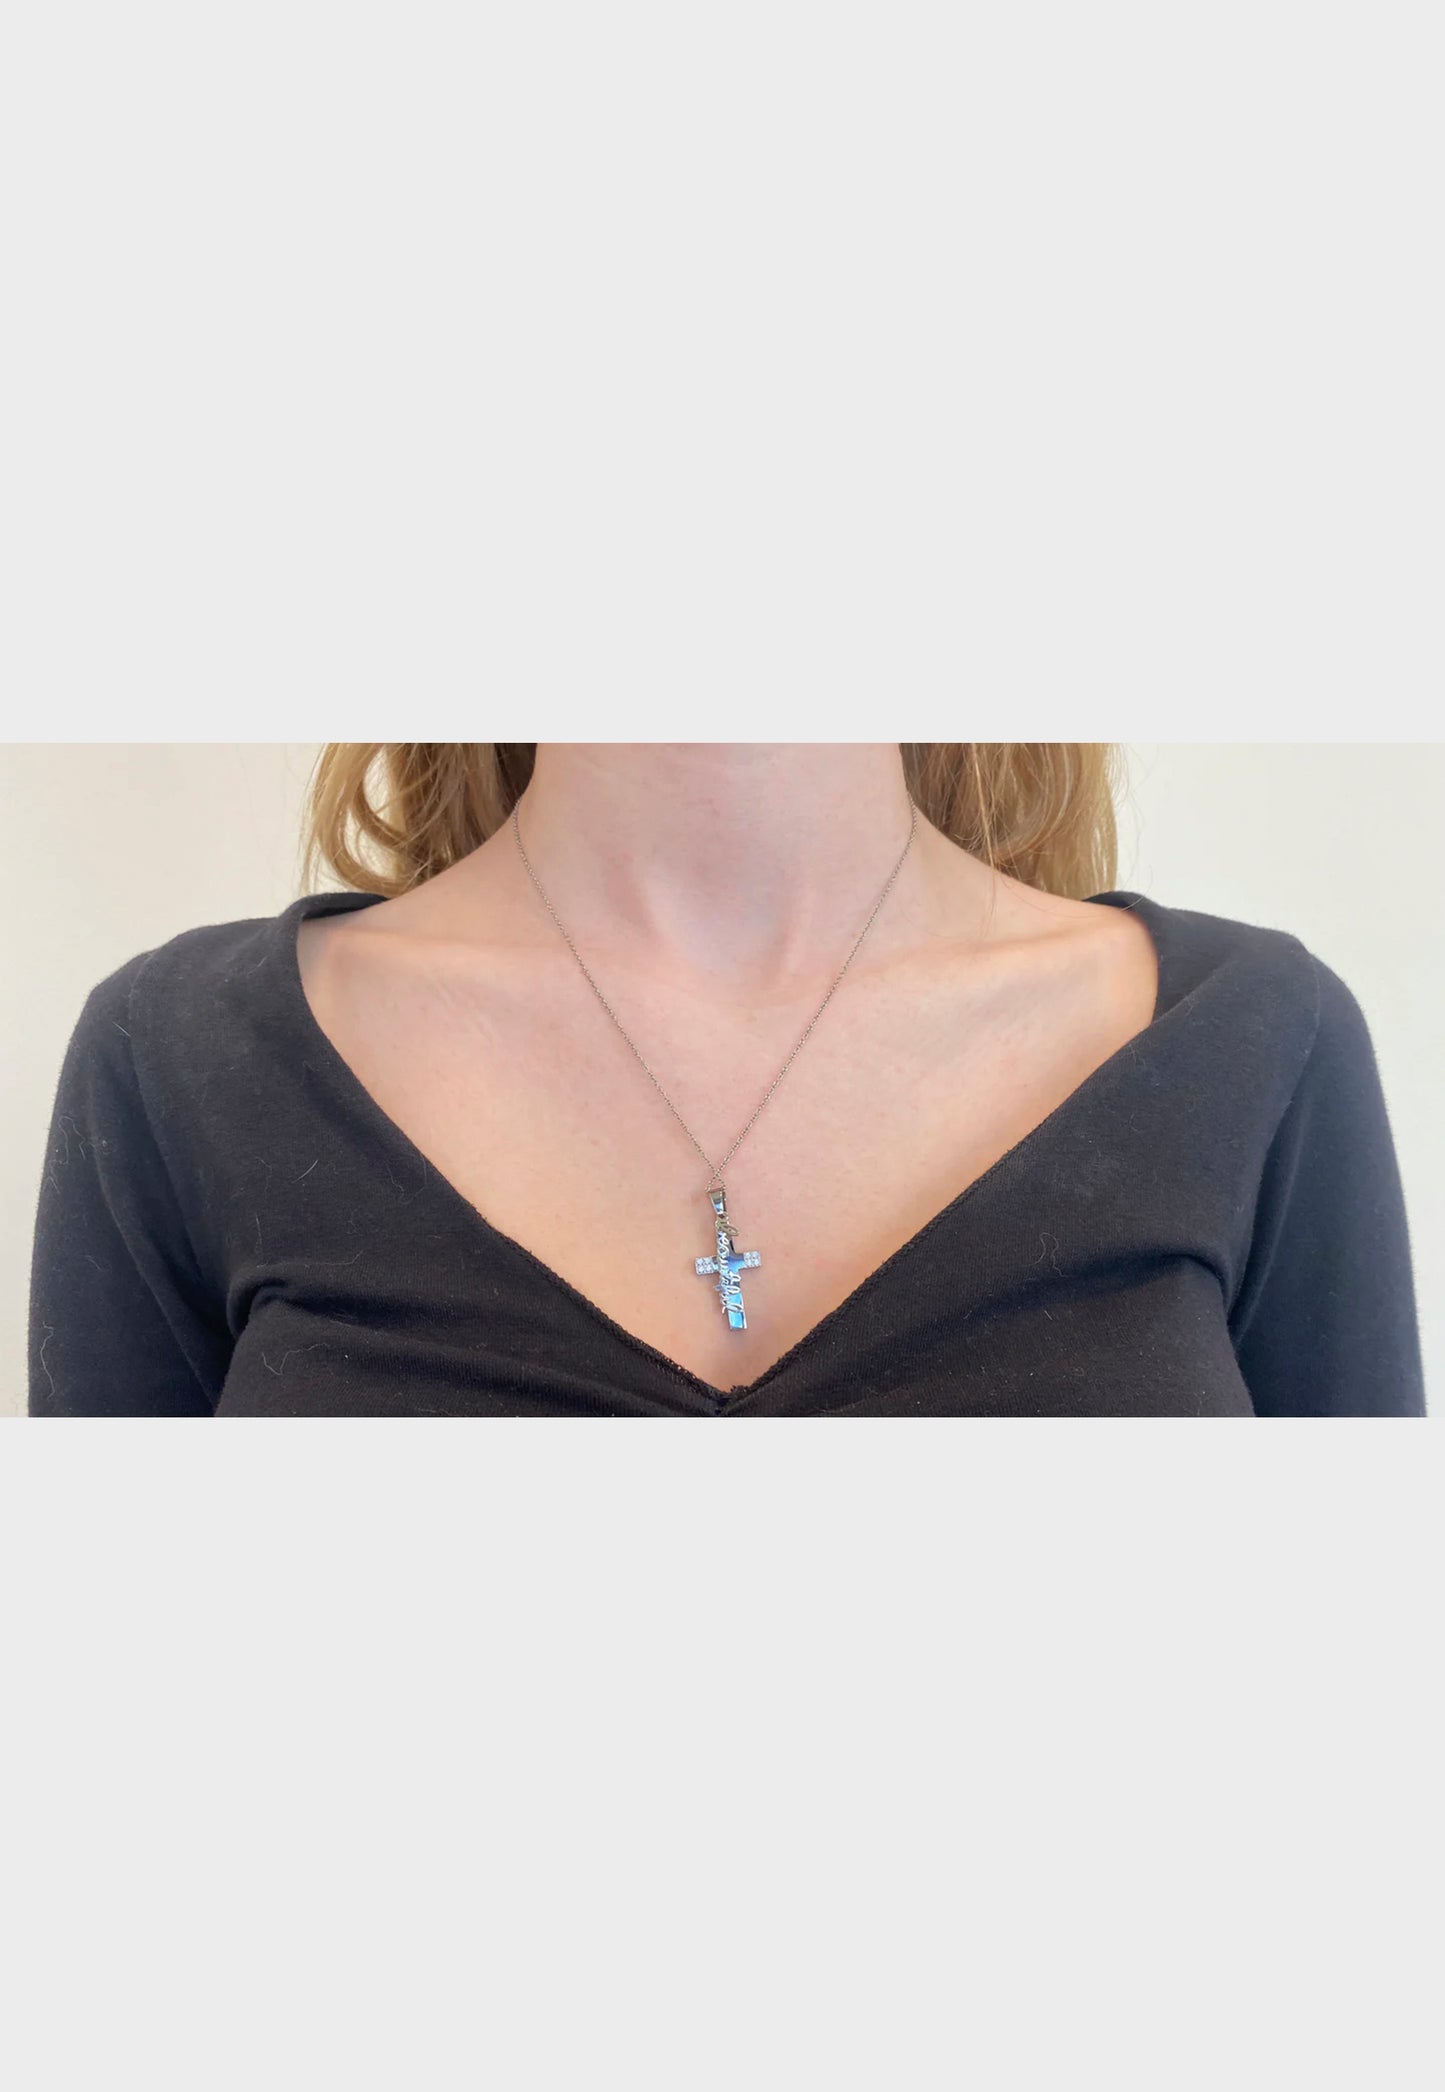 Be Still Christian necklace worn by female model